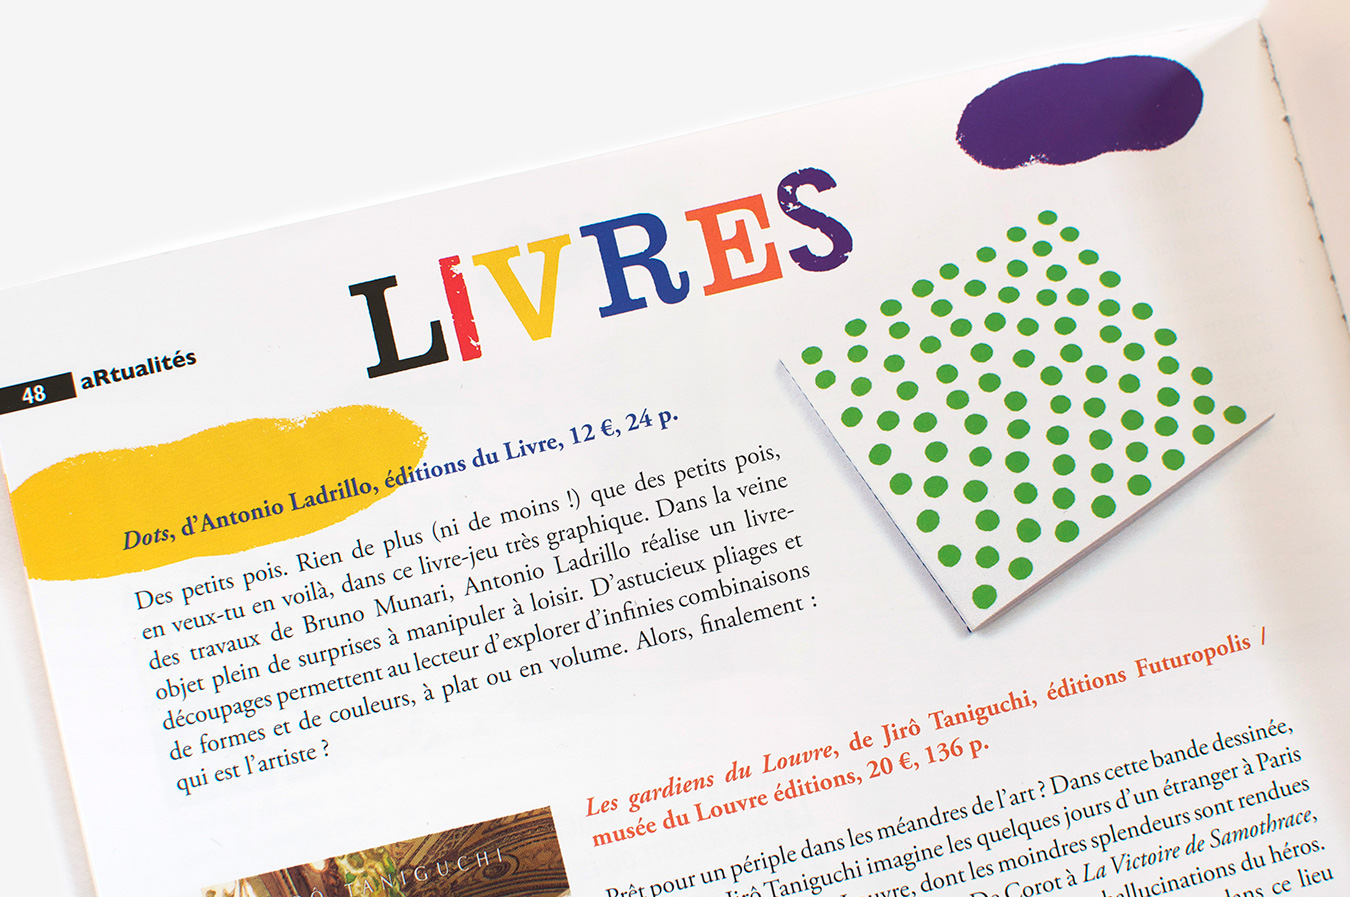 Article about “Dots” by Antonio Ladrillo published in Revue Dada n°199